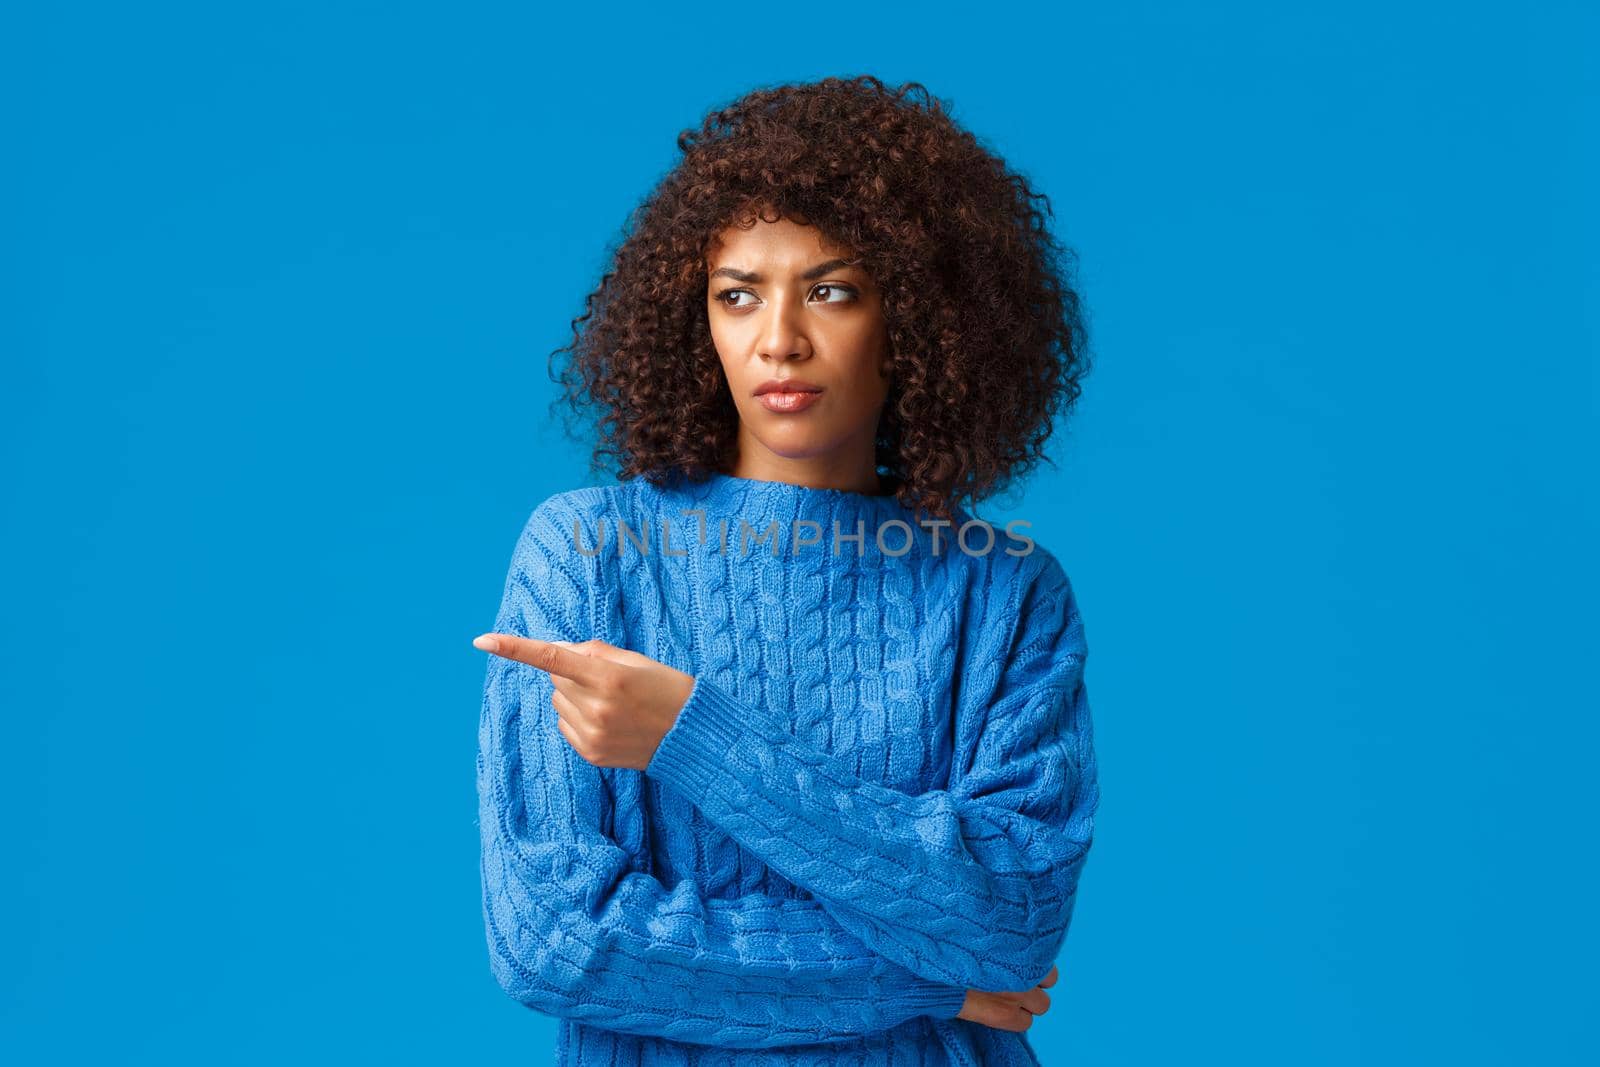 What a heck. Displeased and reluctant african-american bothered woman with afro haircut, pointing looking left with disapproval, express condemn or scorn, standing unsatisfied blue background.